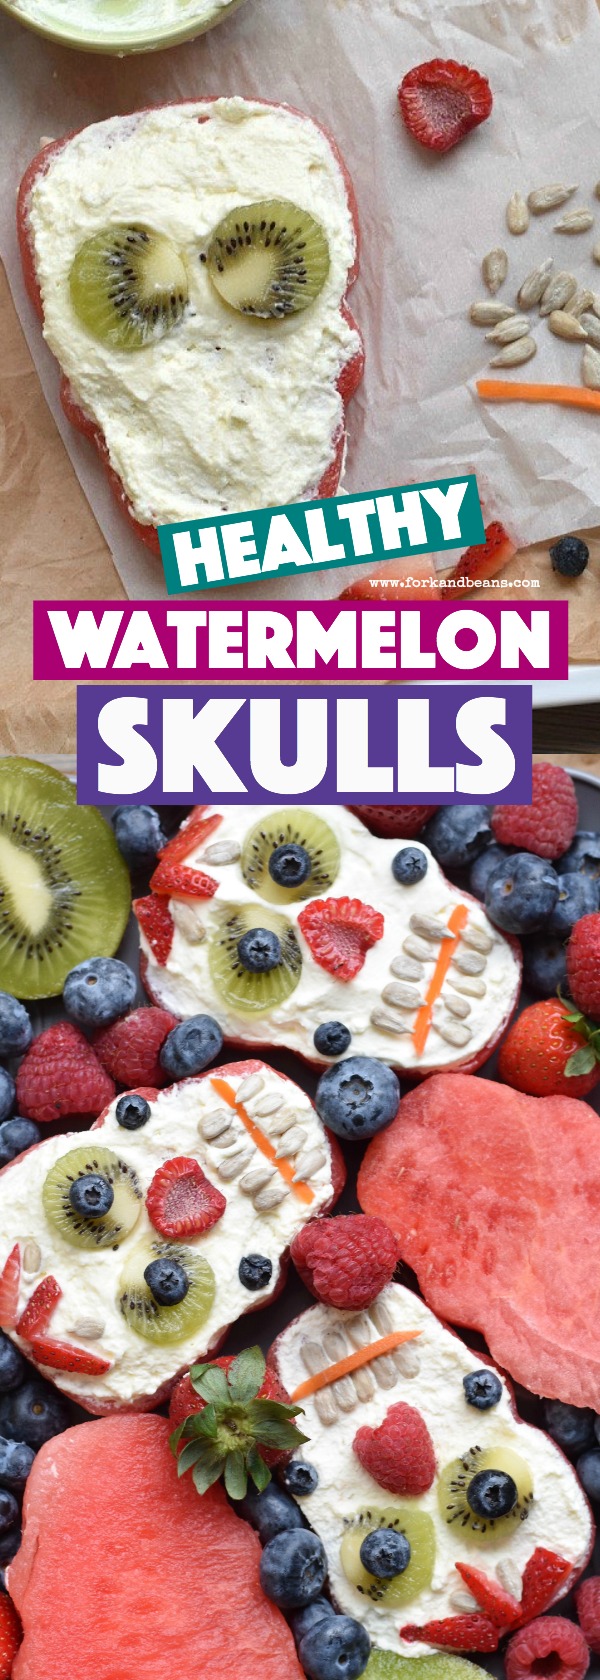 Giving your kids nutritious snack over the holiday can be possible (and still fun!) with these Refined Sugar Free Watermelon Skulls! #kidfood #kidshalloween